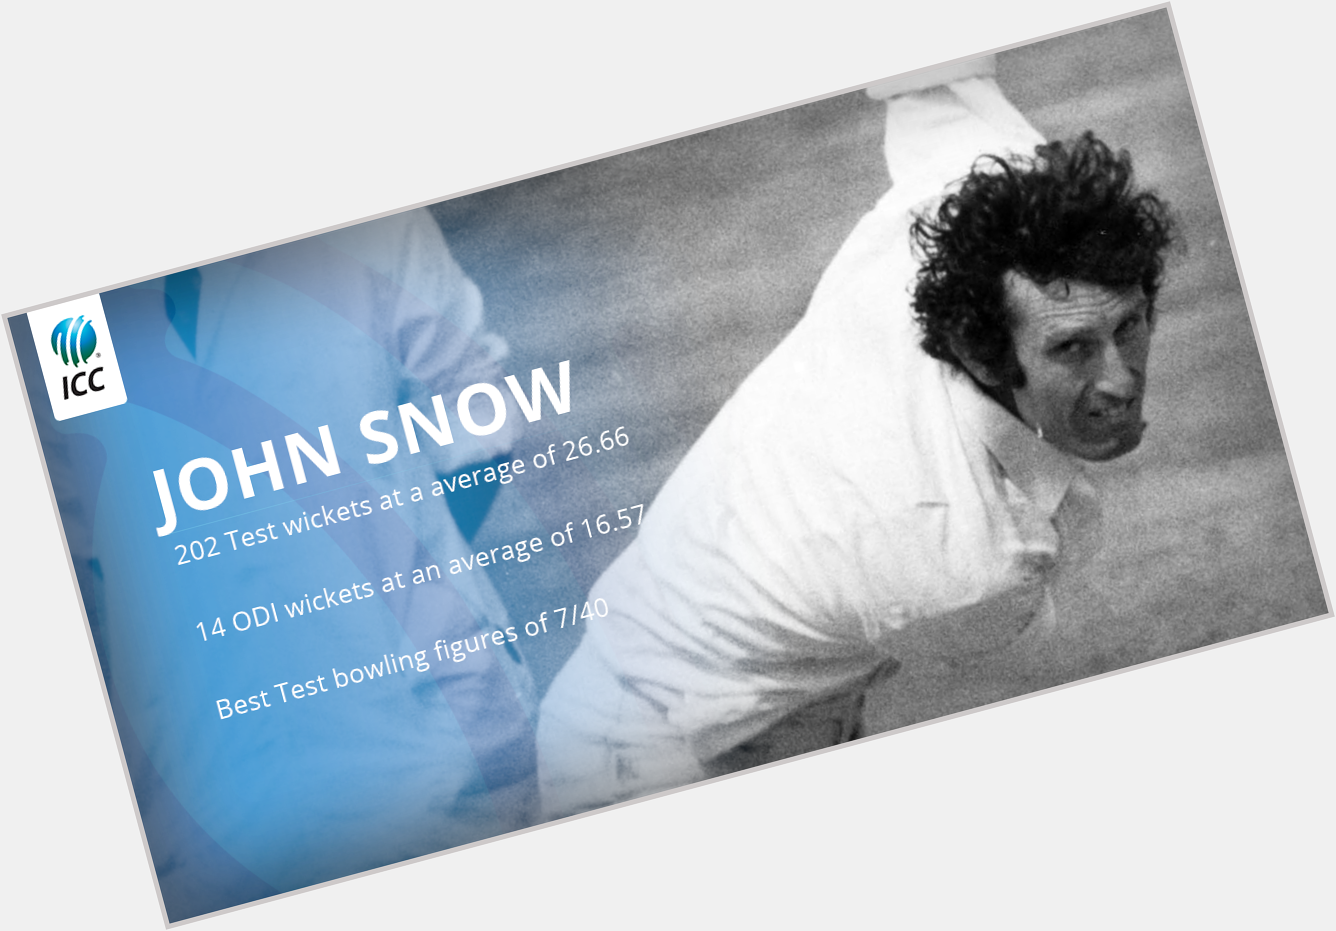 Happy Birthday to England\s premier pace bowler in the mid-1960s, John Snow! 